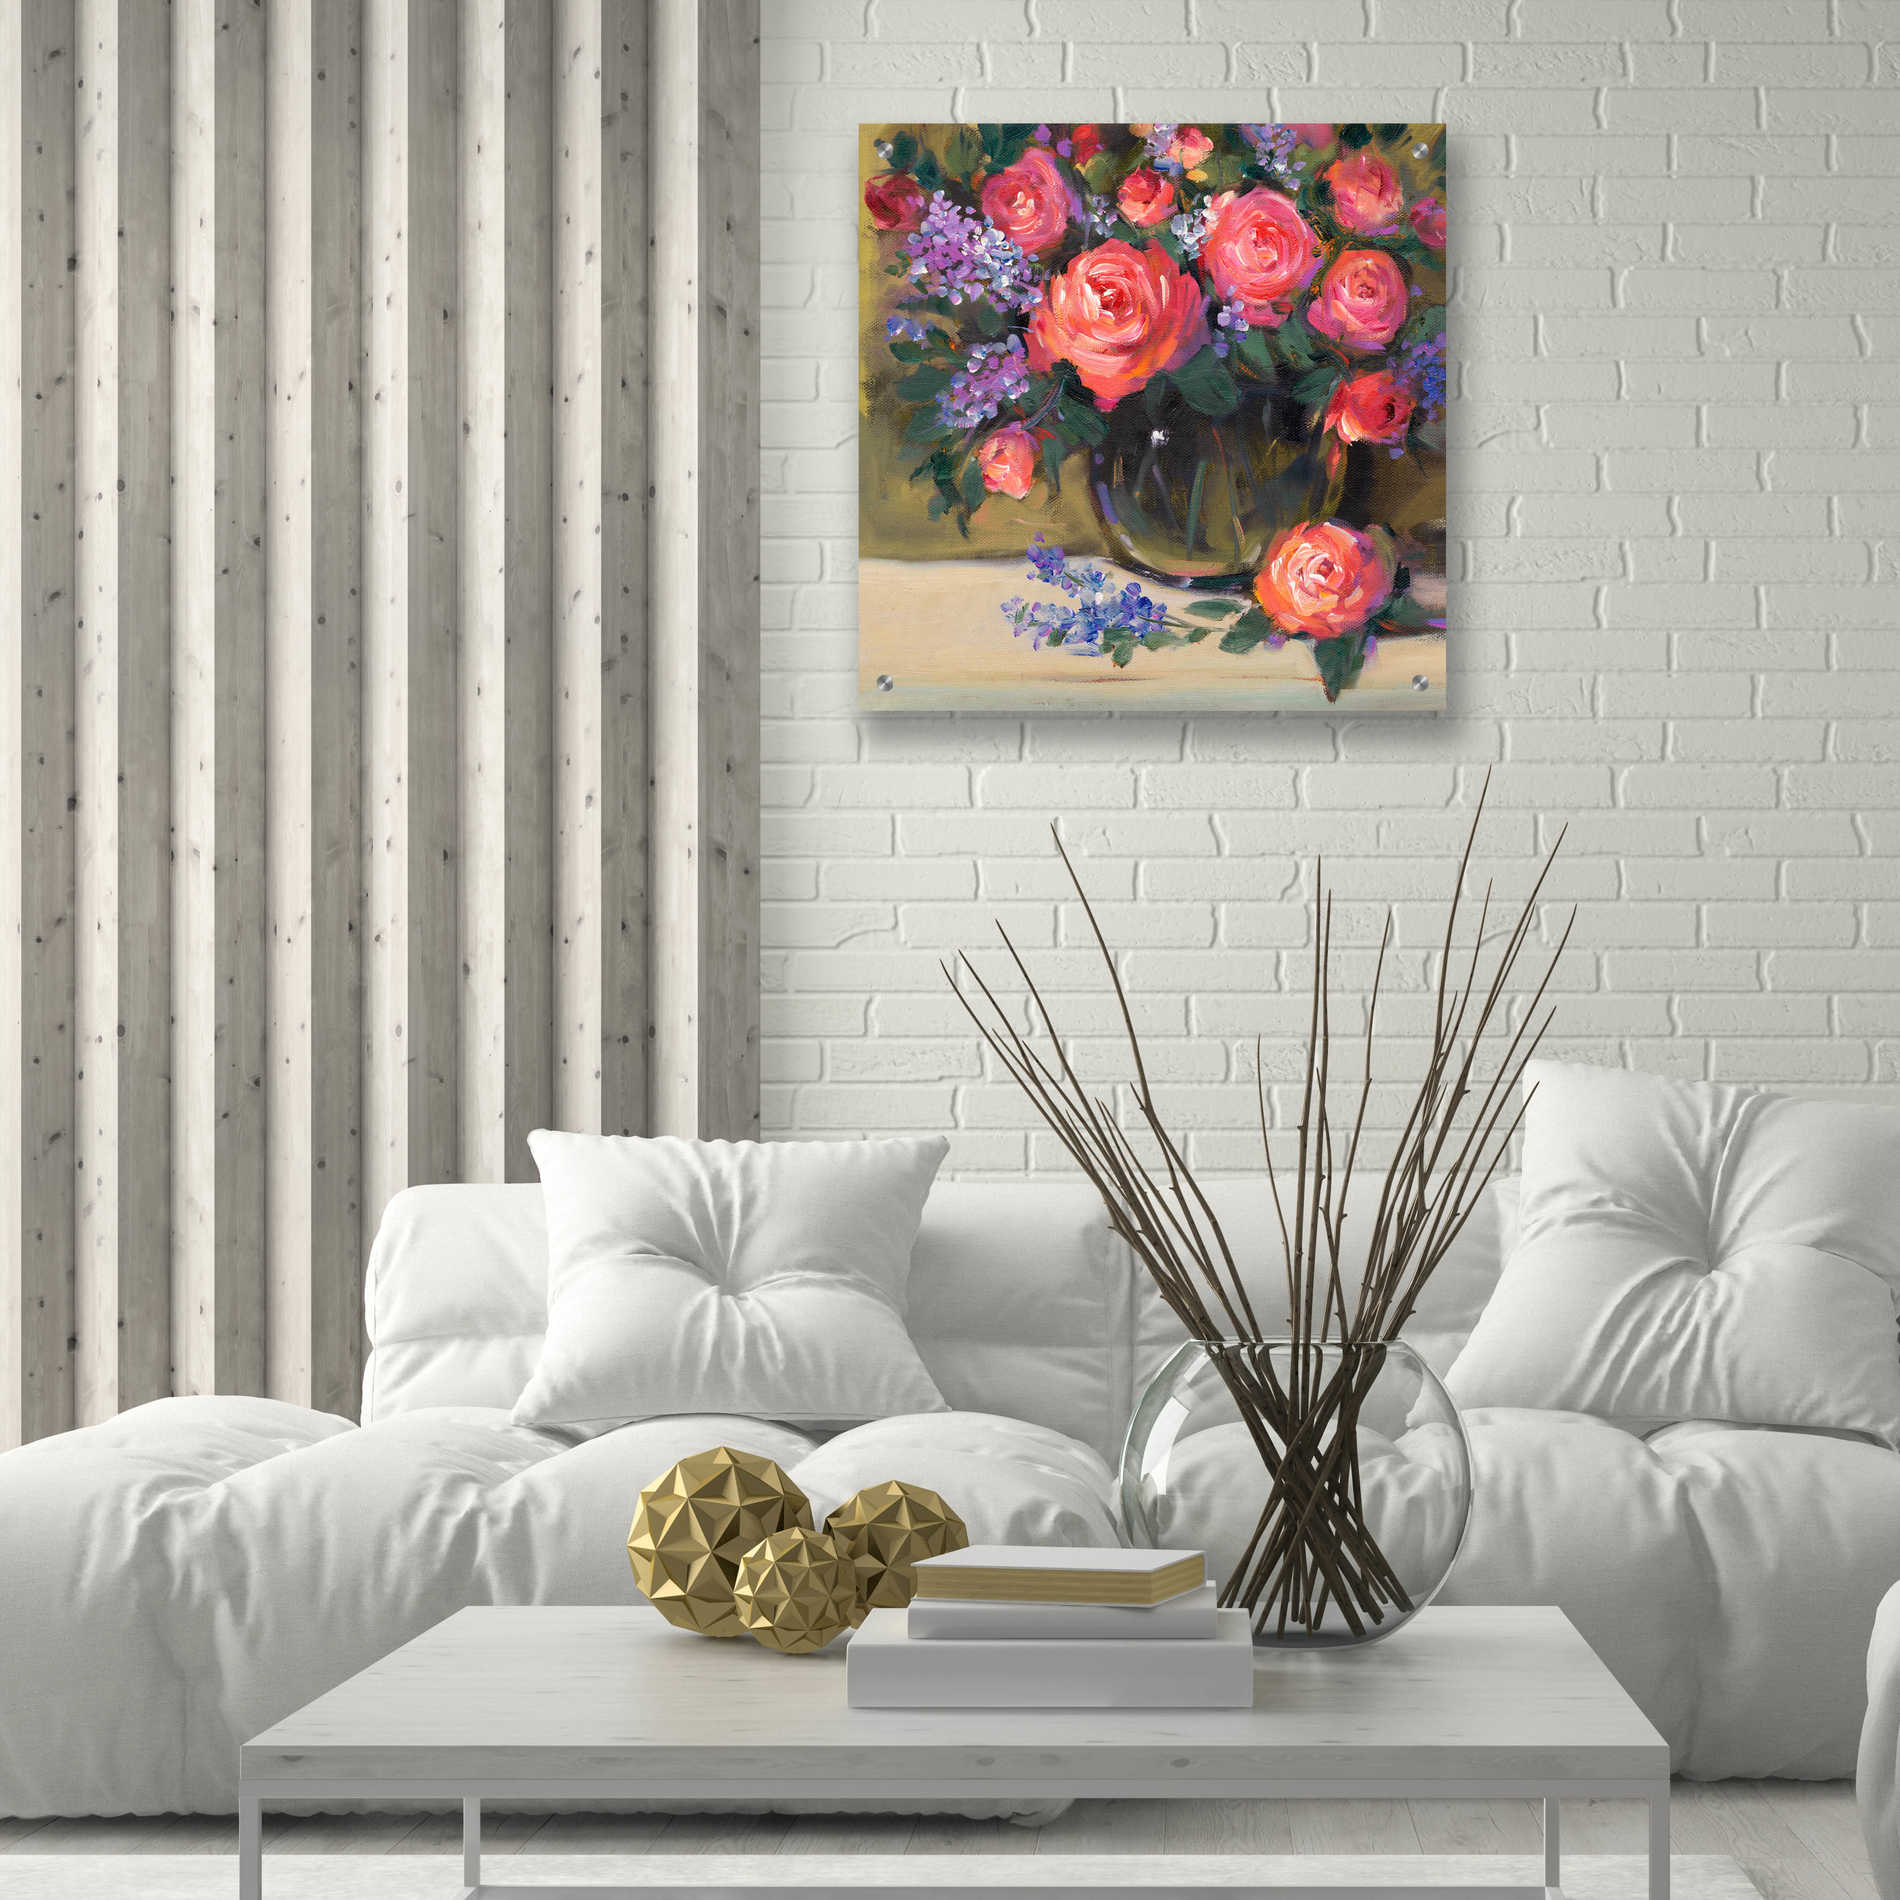 Epic Art 'Floral Still Life I' by Tim O'Toole, Acrylic Glass Wall Art,24x24